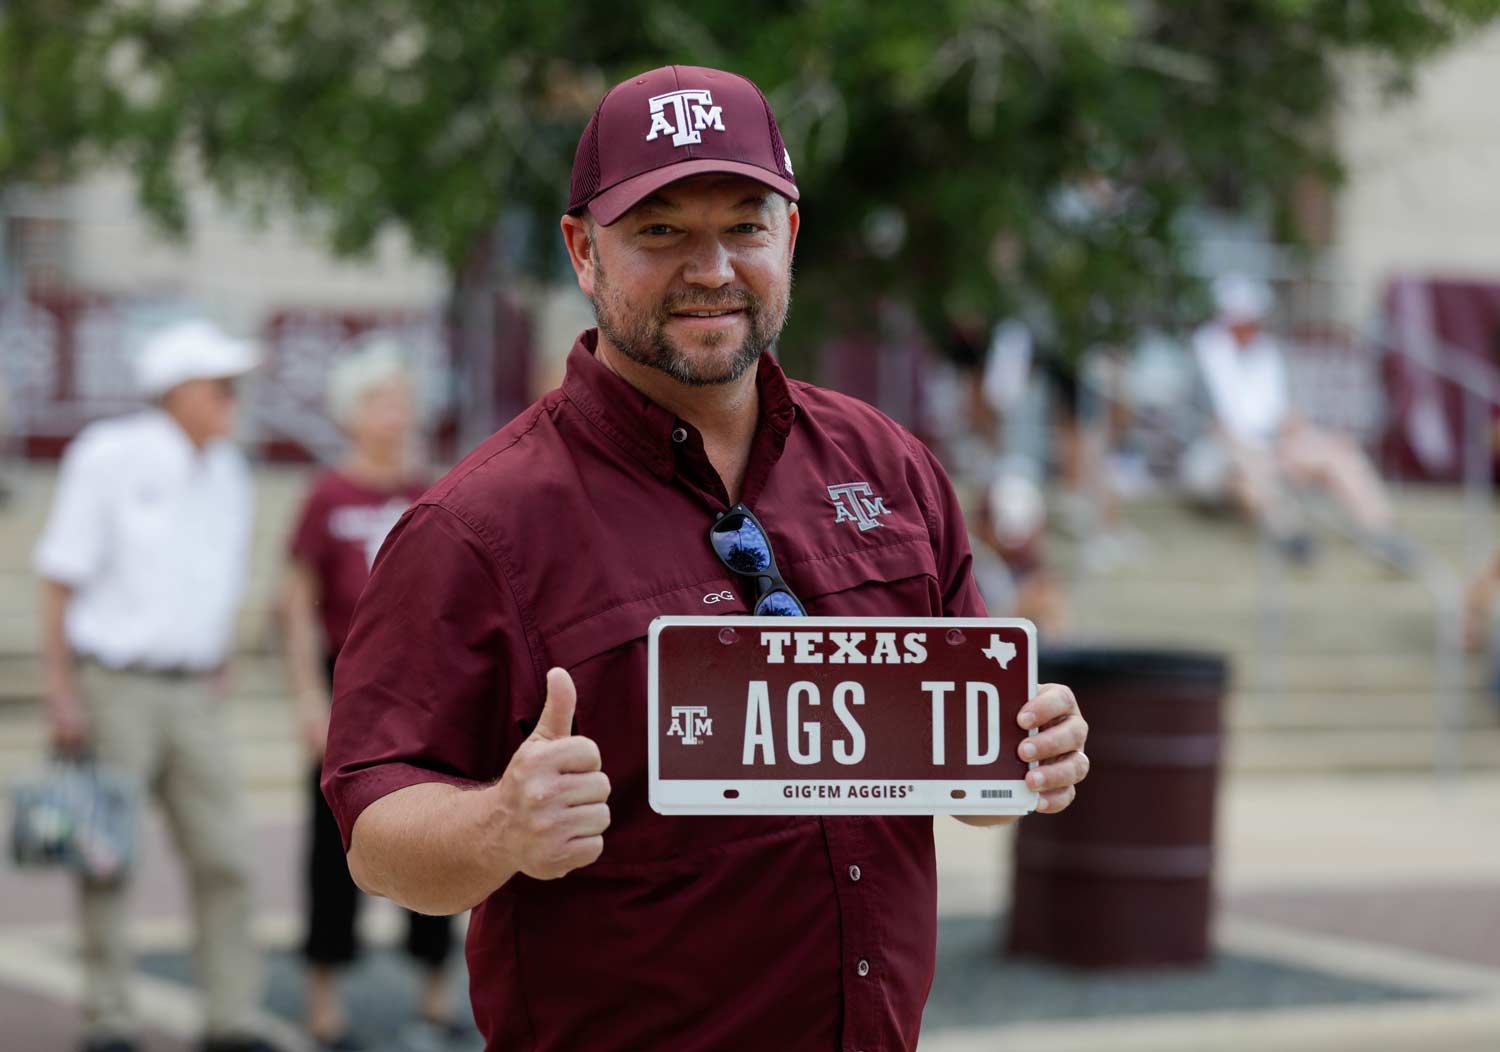 Aggie holding up his custom license plate